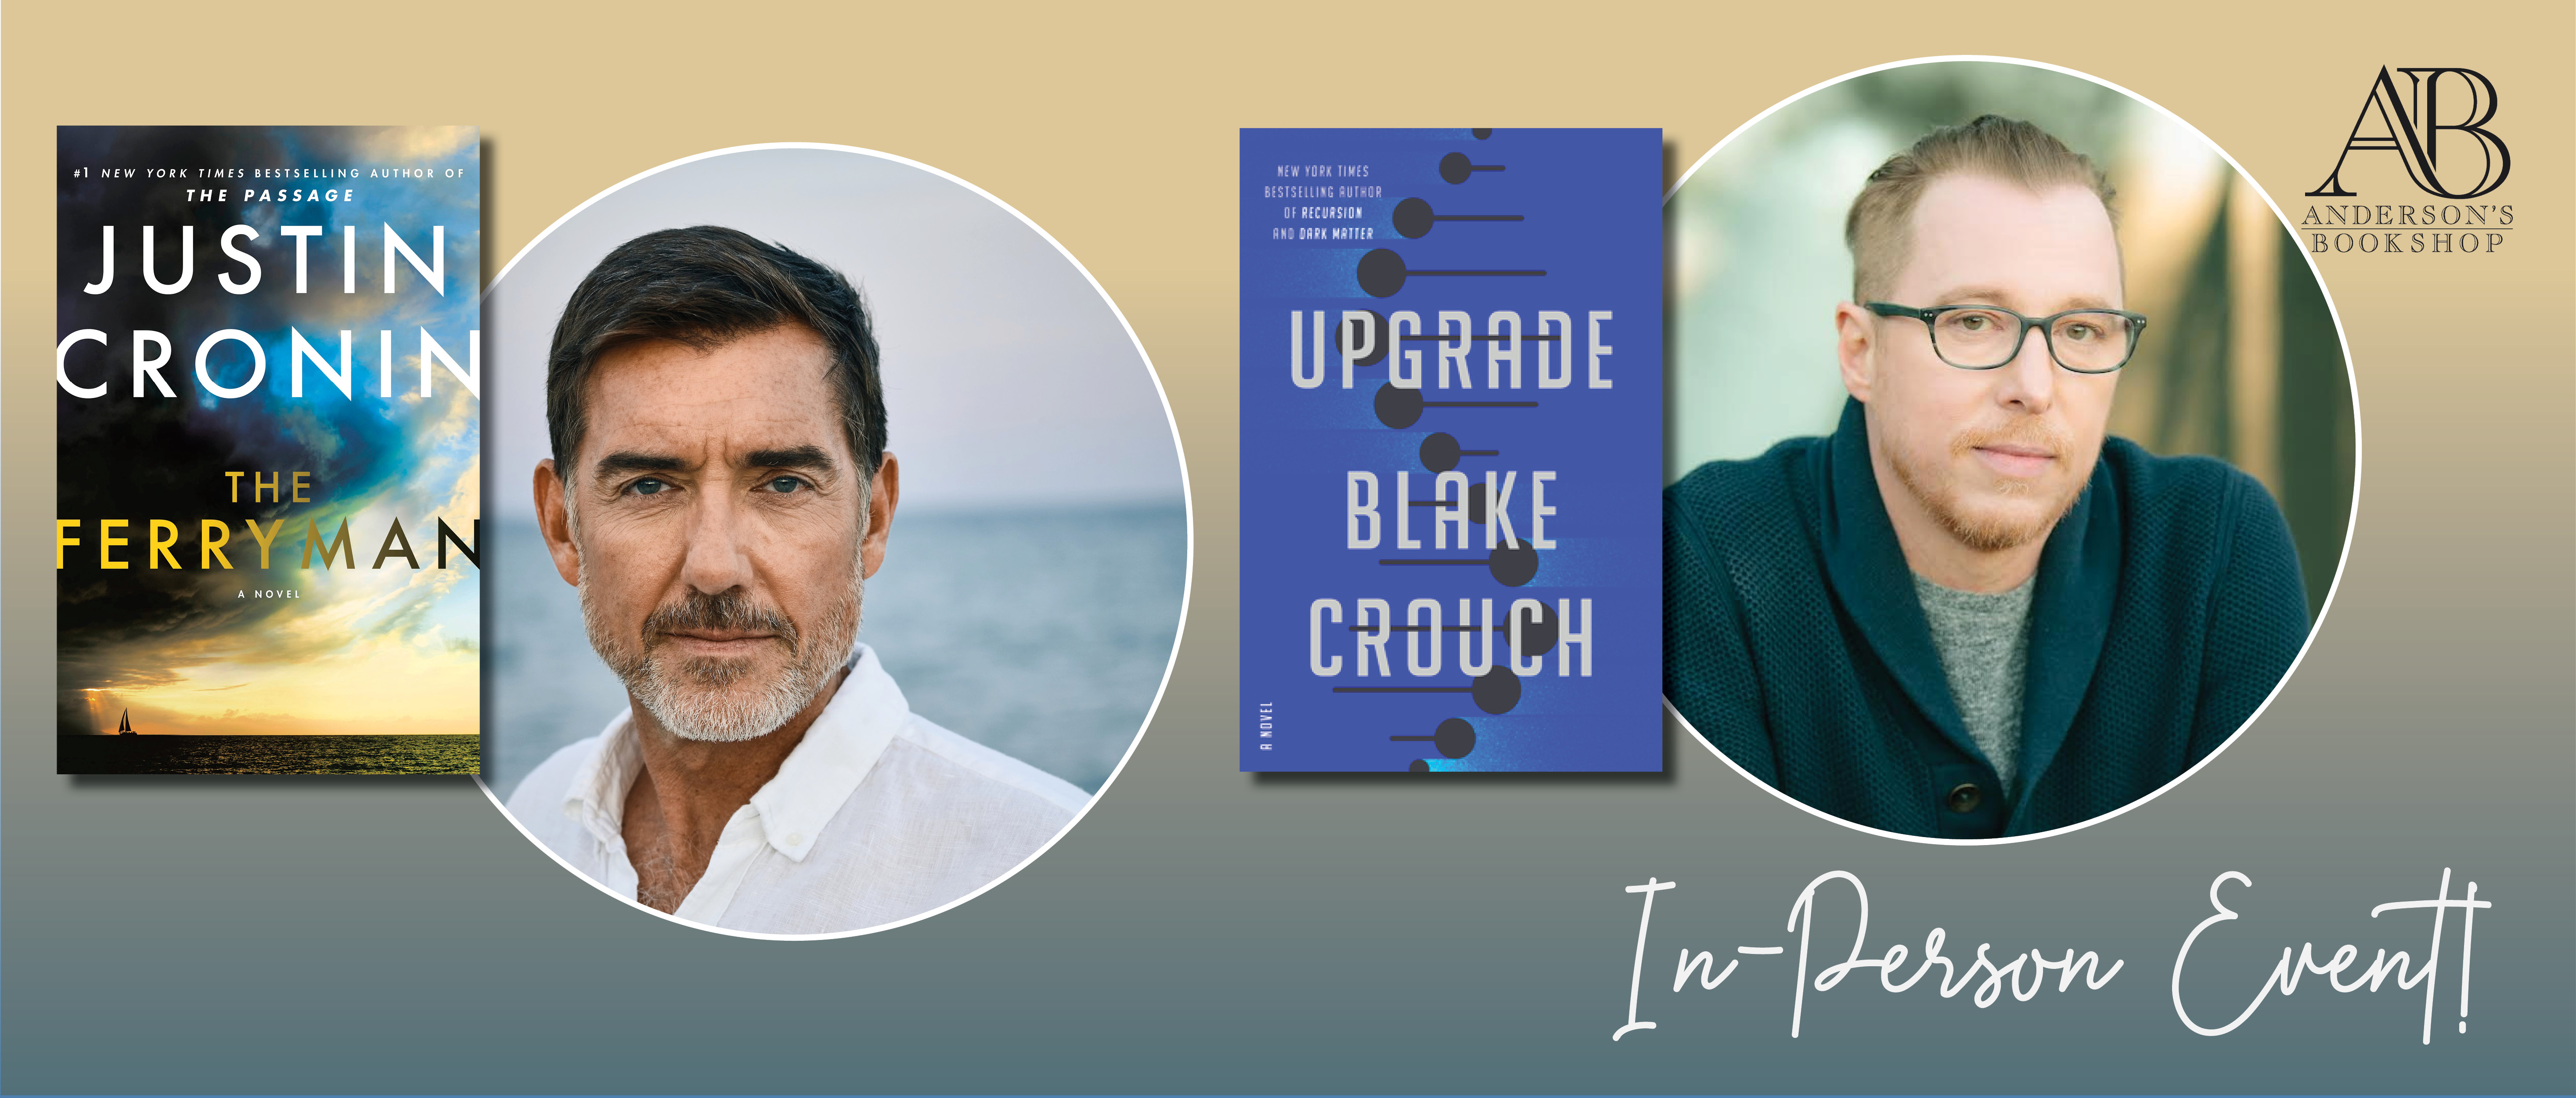 Author Event with Justin Cronin and Blake Crouch